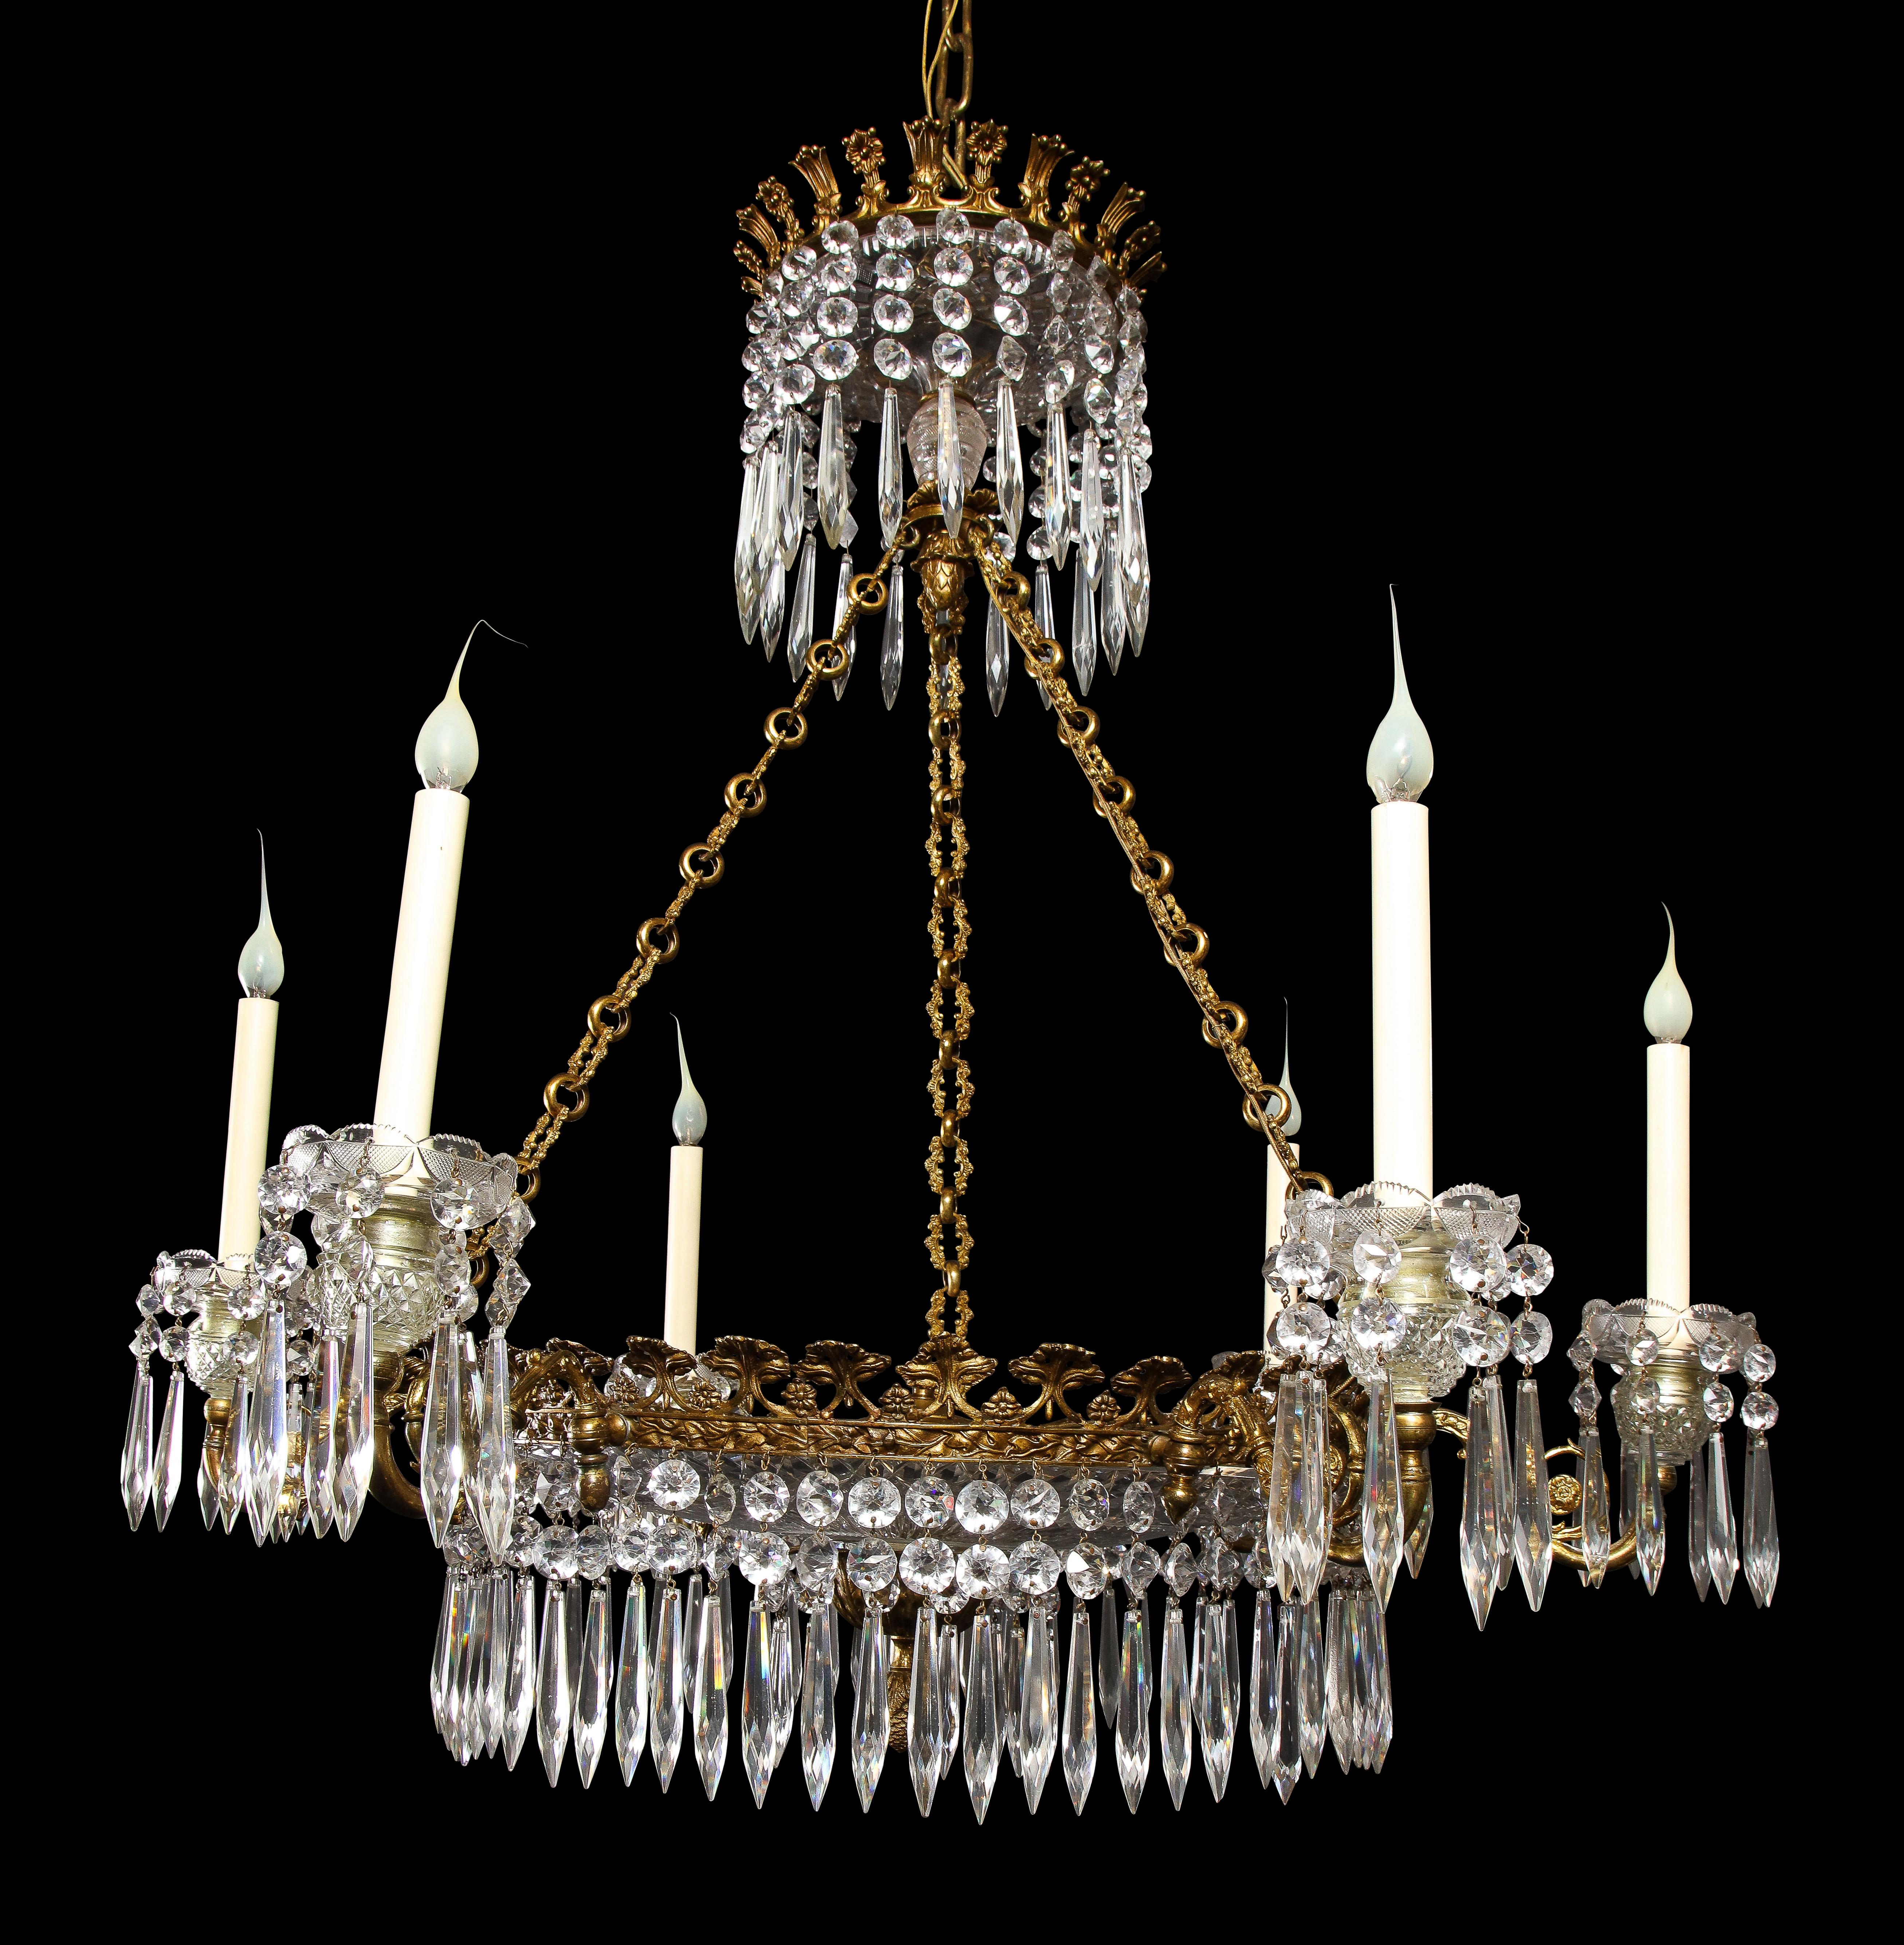 A Large Antique English Regency Style Gilt bronze and cut crystal multi light chandelier of superb craftsmanship. This fine chandelier is embellished with a large cut crystal circular central dish and further adorned with fine cut crystal prisms.